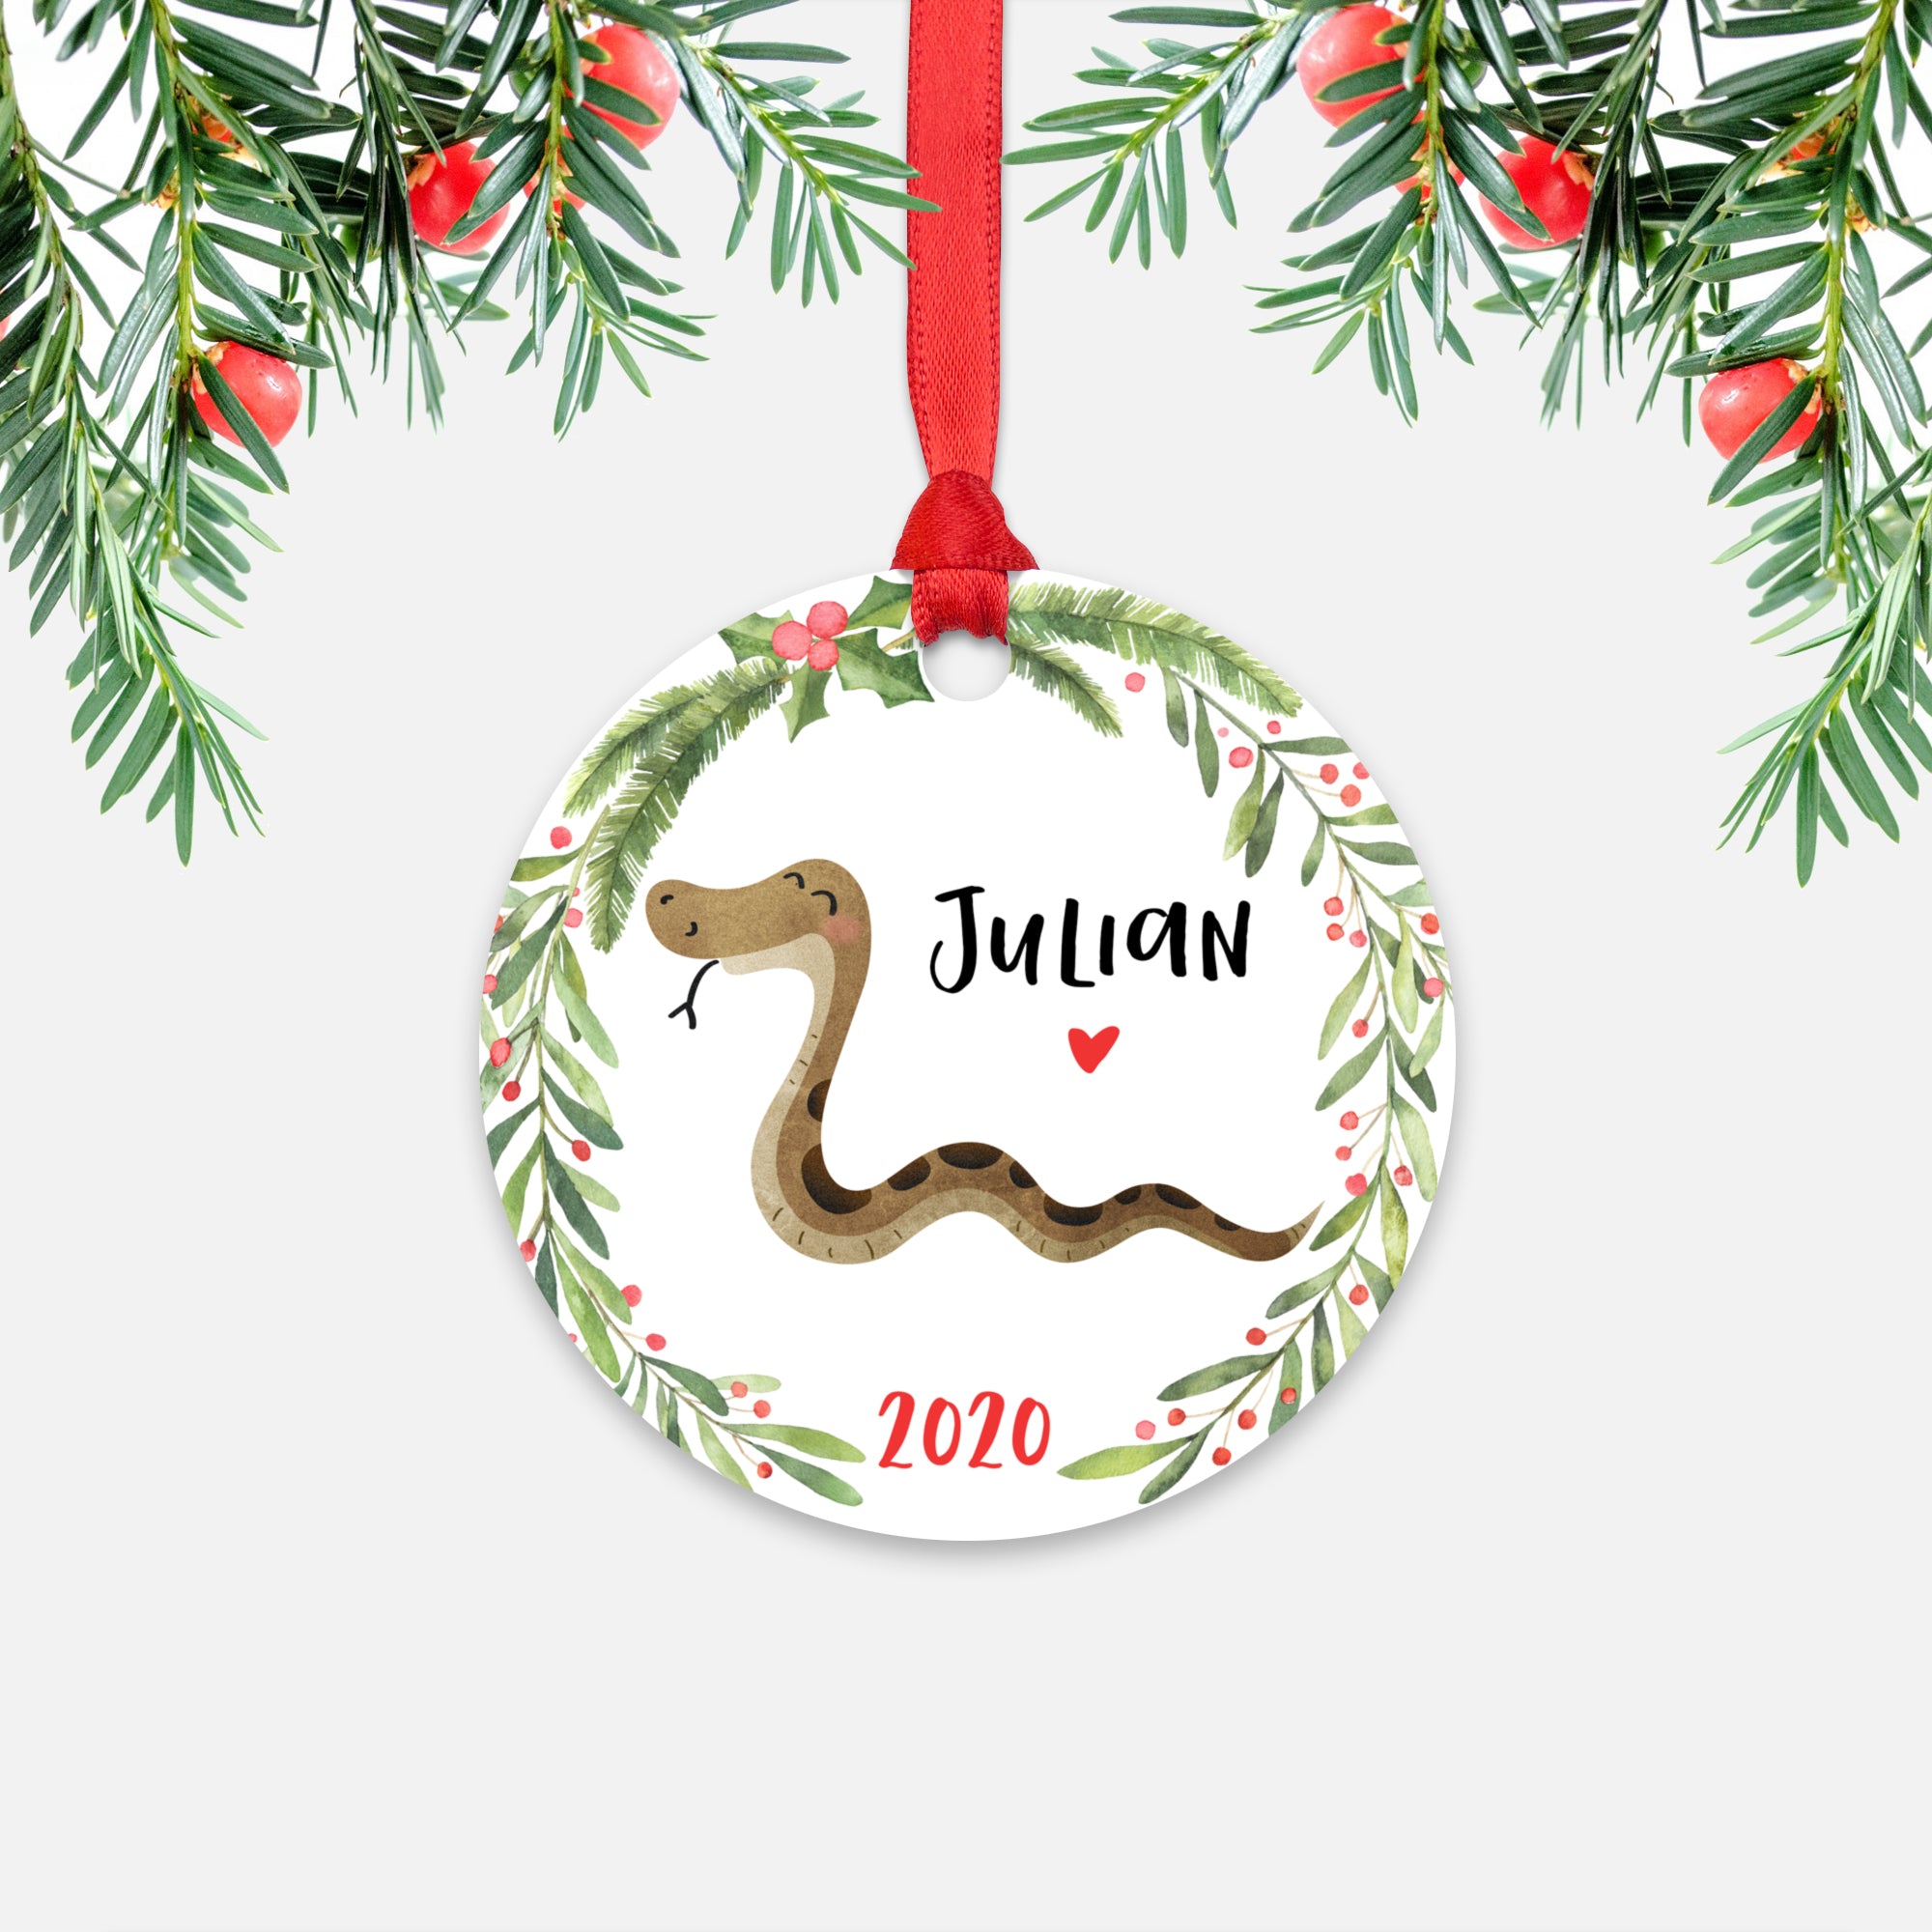 Snake Jungle Animal Personalized Kids Name Christmas Ornament for Boy or Girl - Round Aluminum - Red ribbon